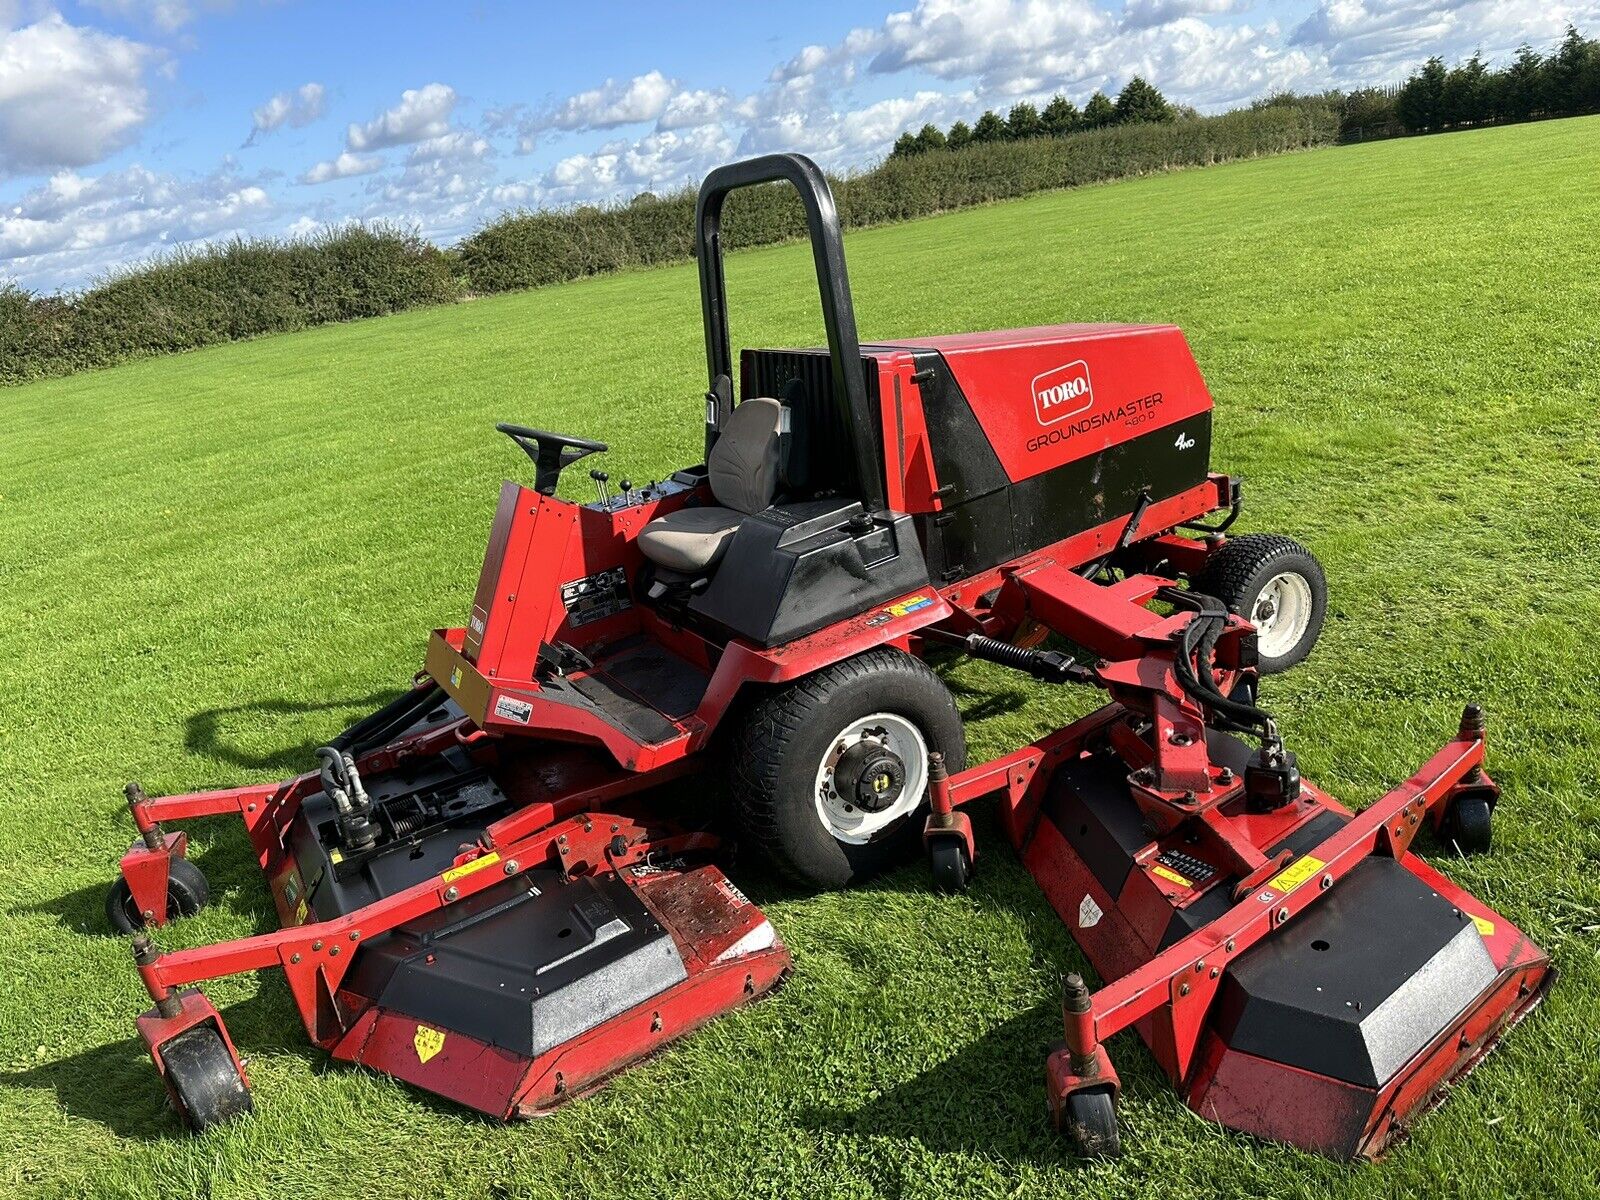 USED 2006 TORO GROUNDSMASTER 580-D WIDE AREA BATWING RIDE SIT ON LAWN MOWER